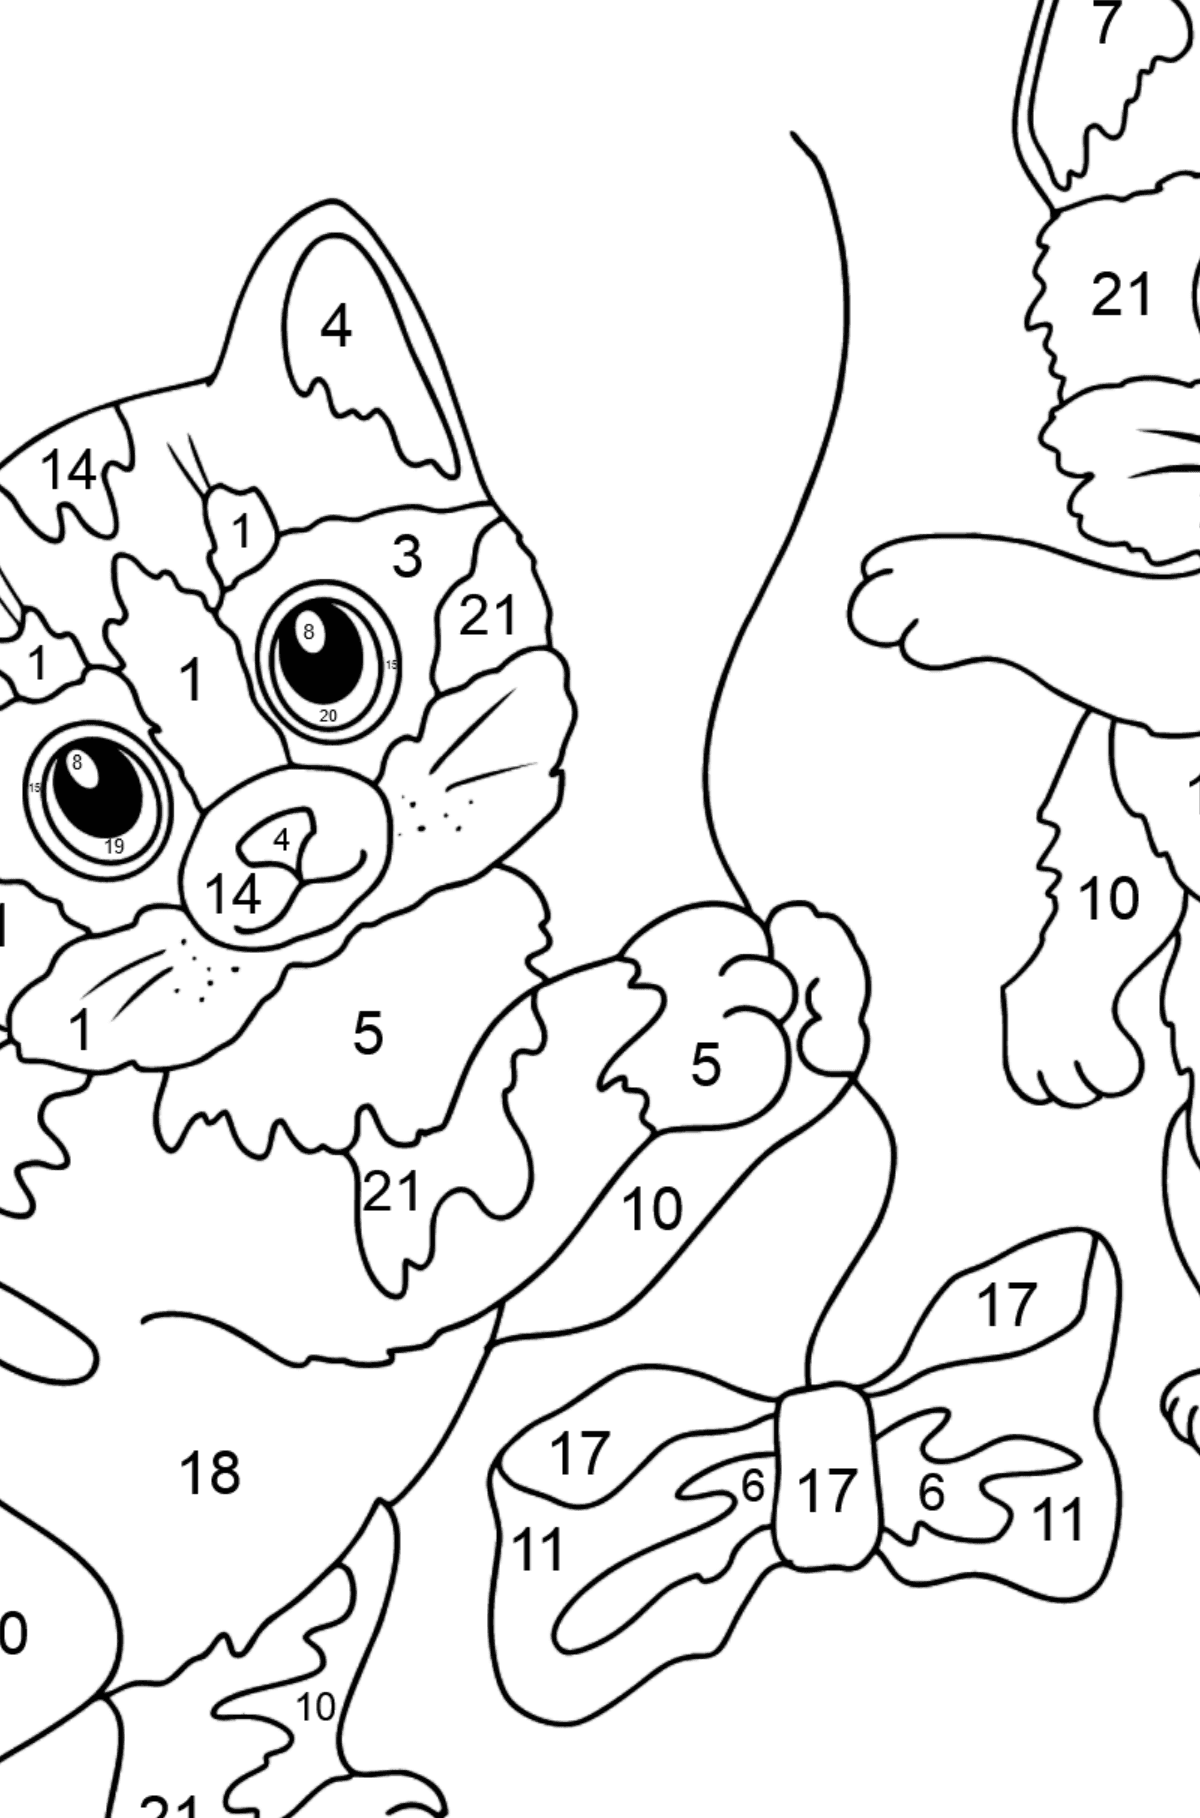 Fluffy Kittens coloring page - Coloring by Numbers for Kids